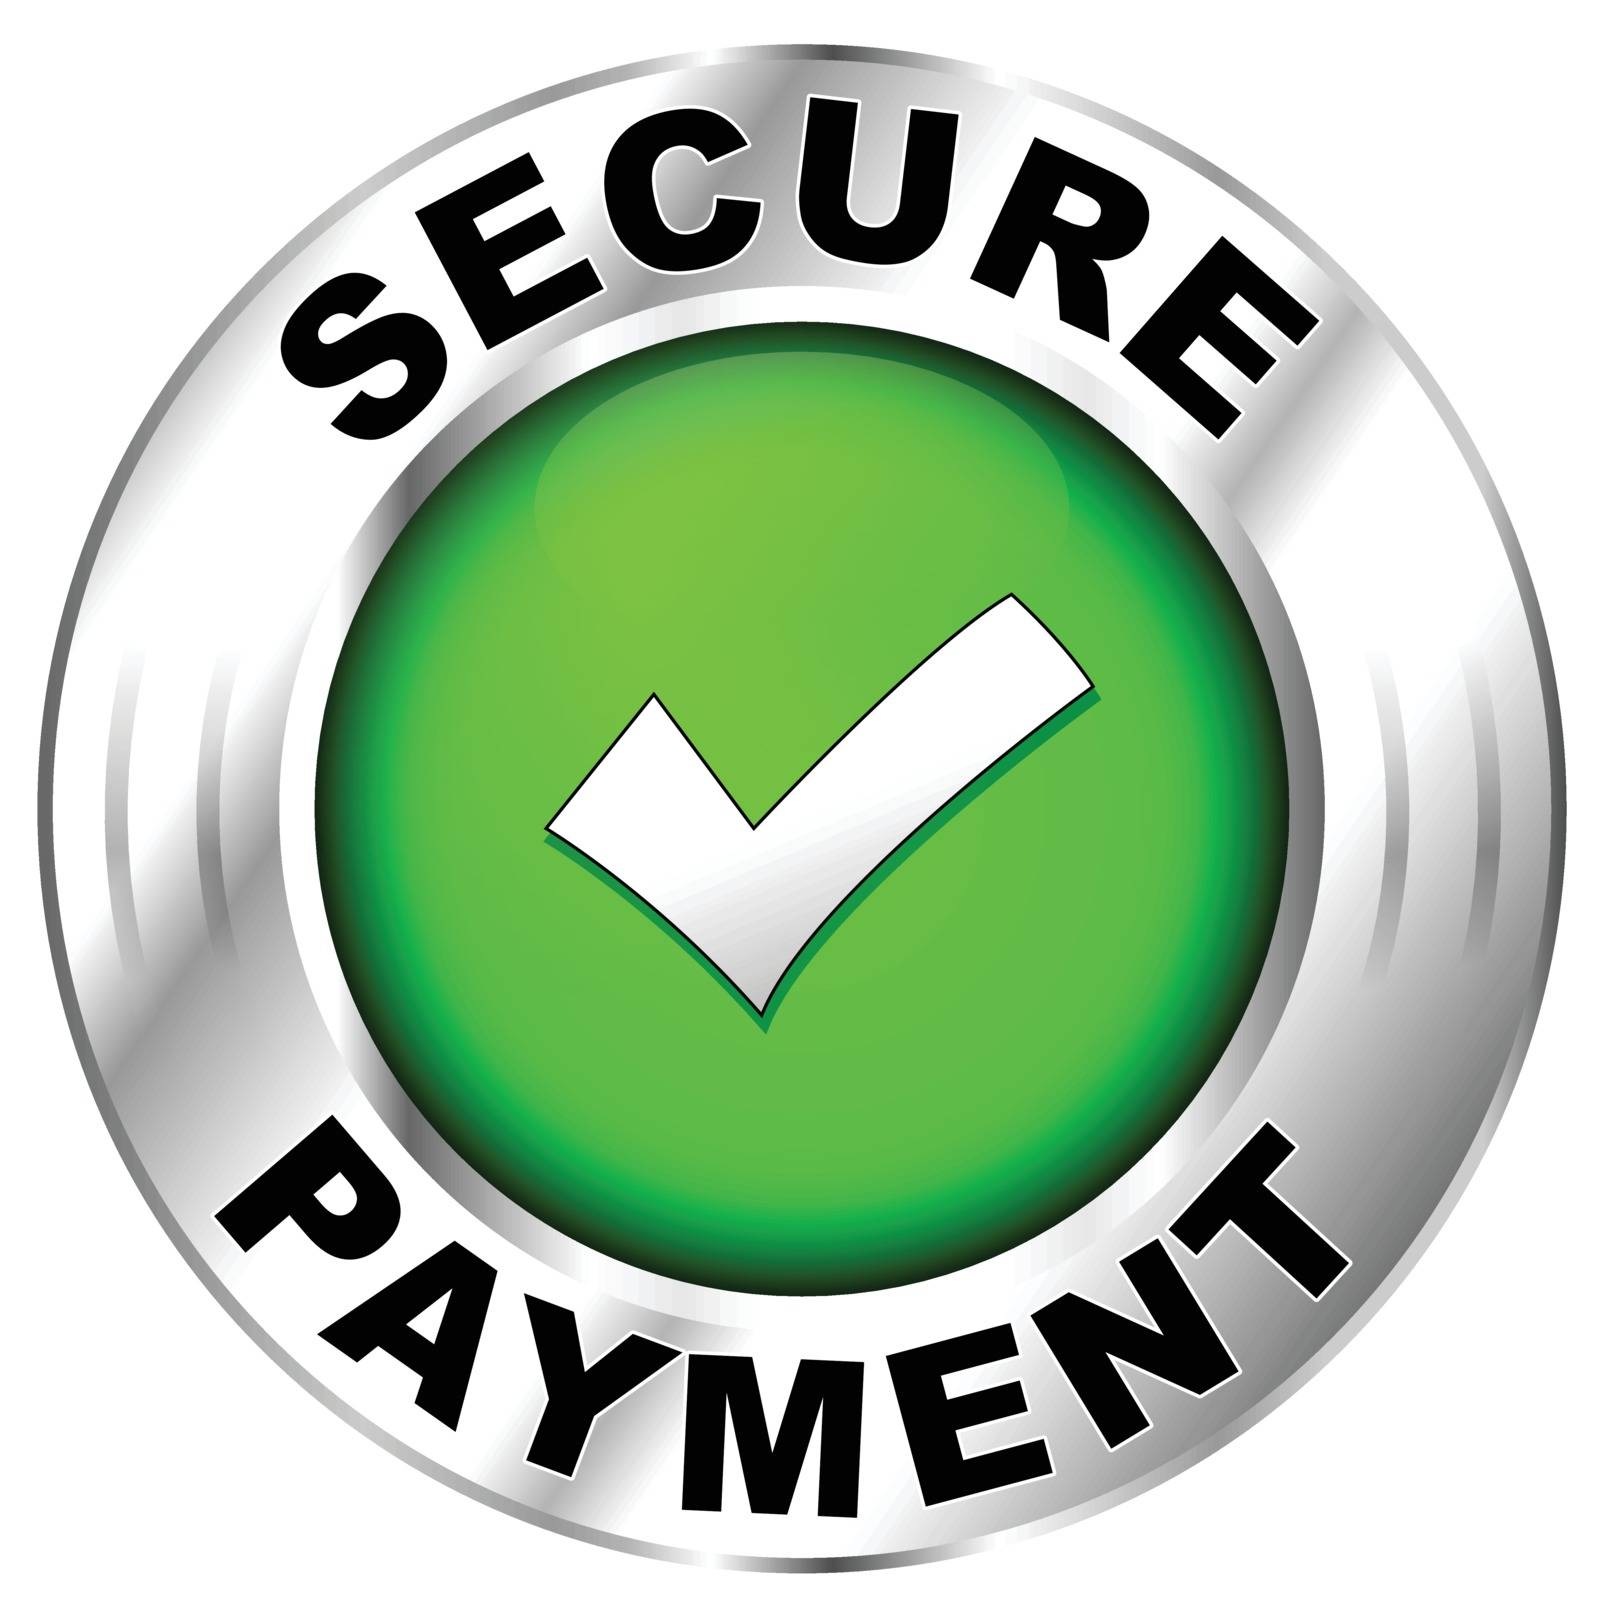 Vector illustration of label for secure payment